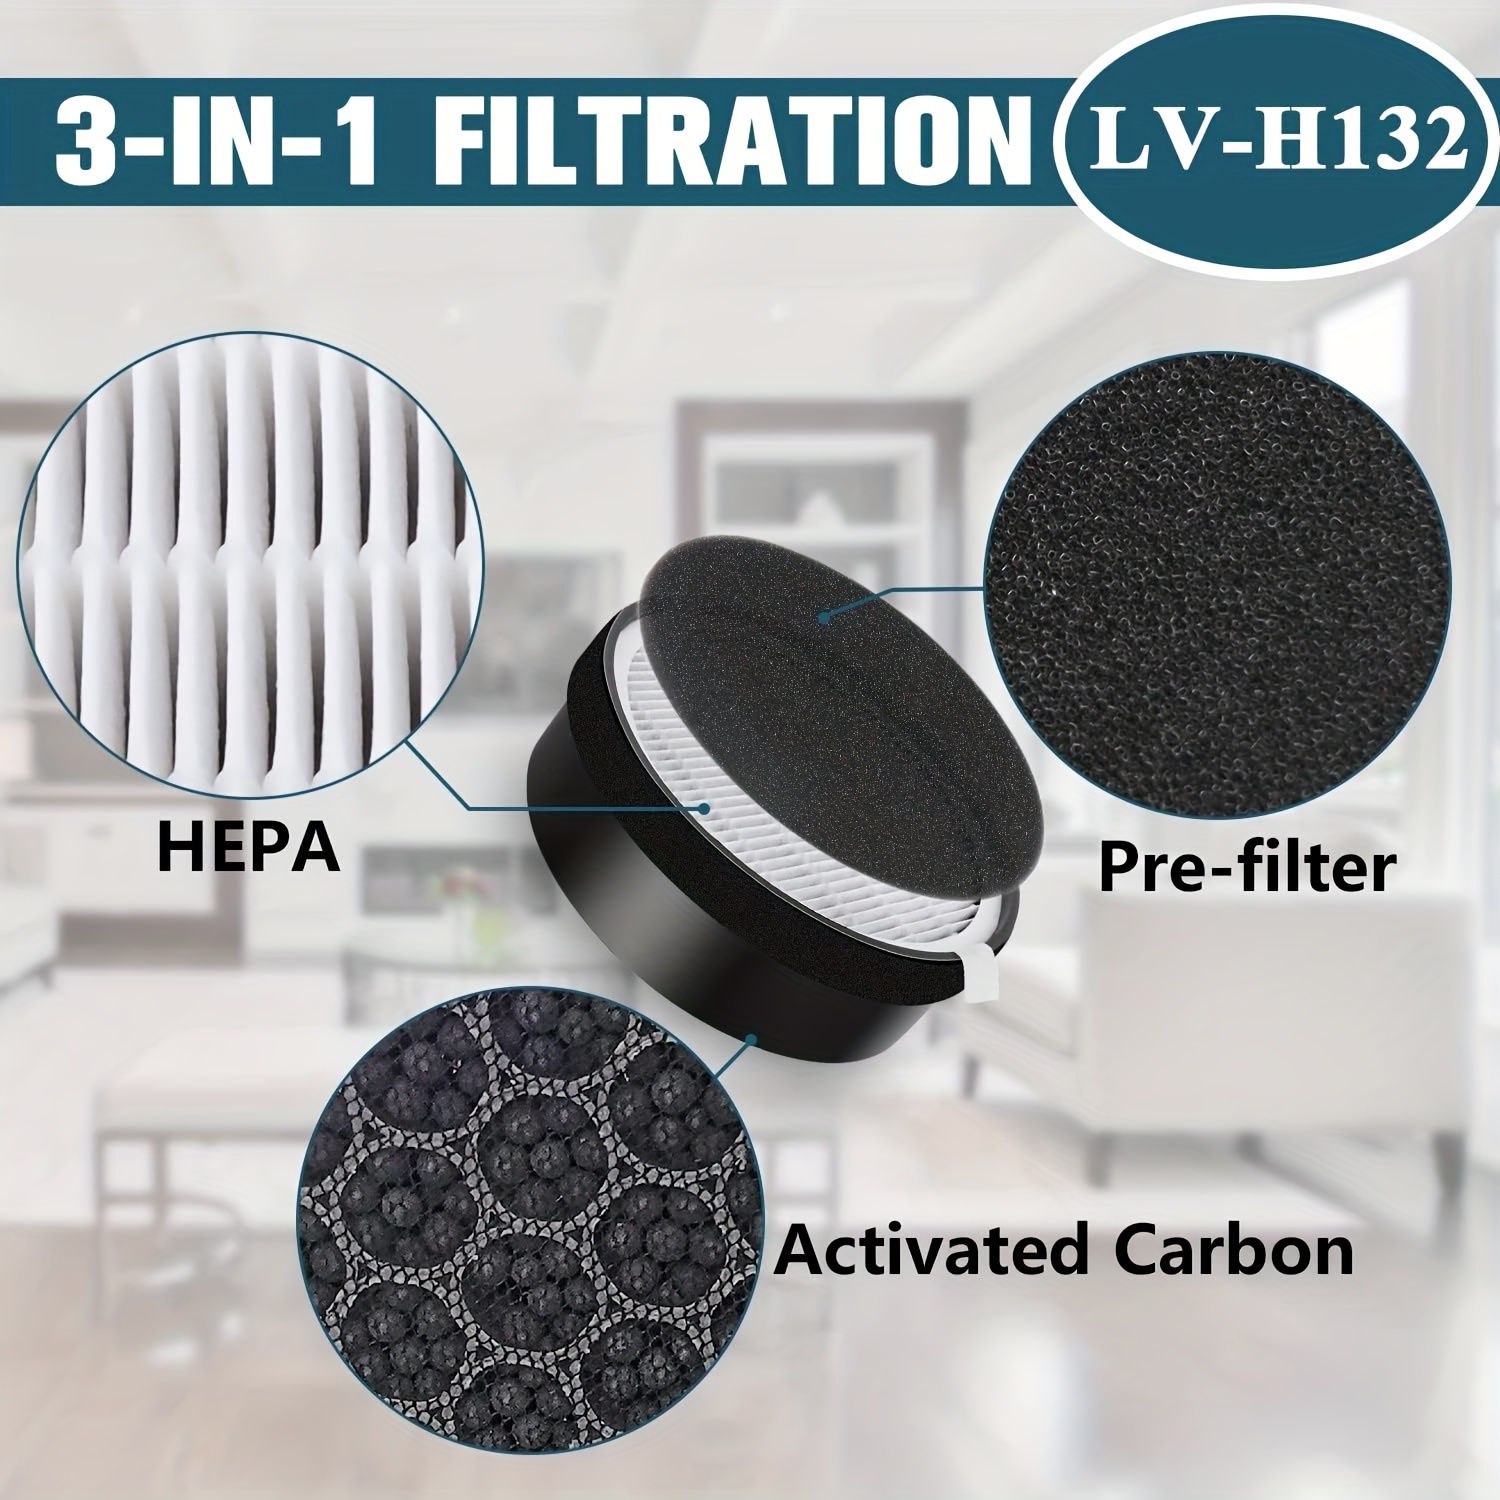 2 Pack 3-in-1 LV-H132 H13 HEPA Air Filter Replacement Filter